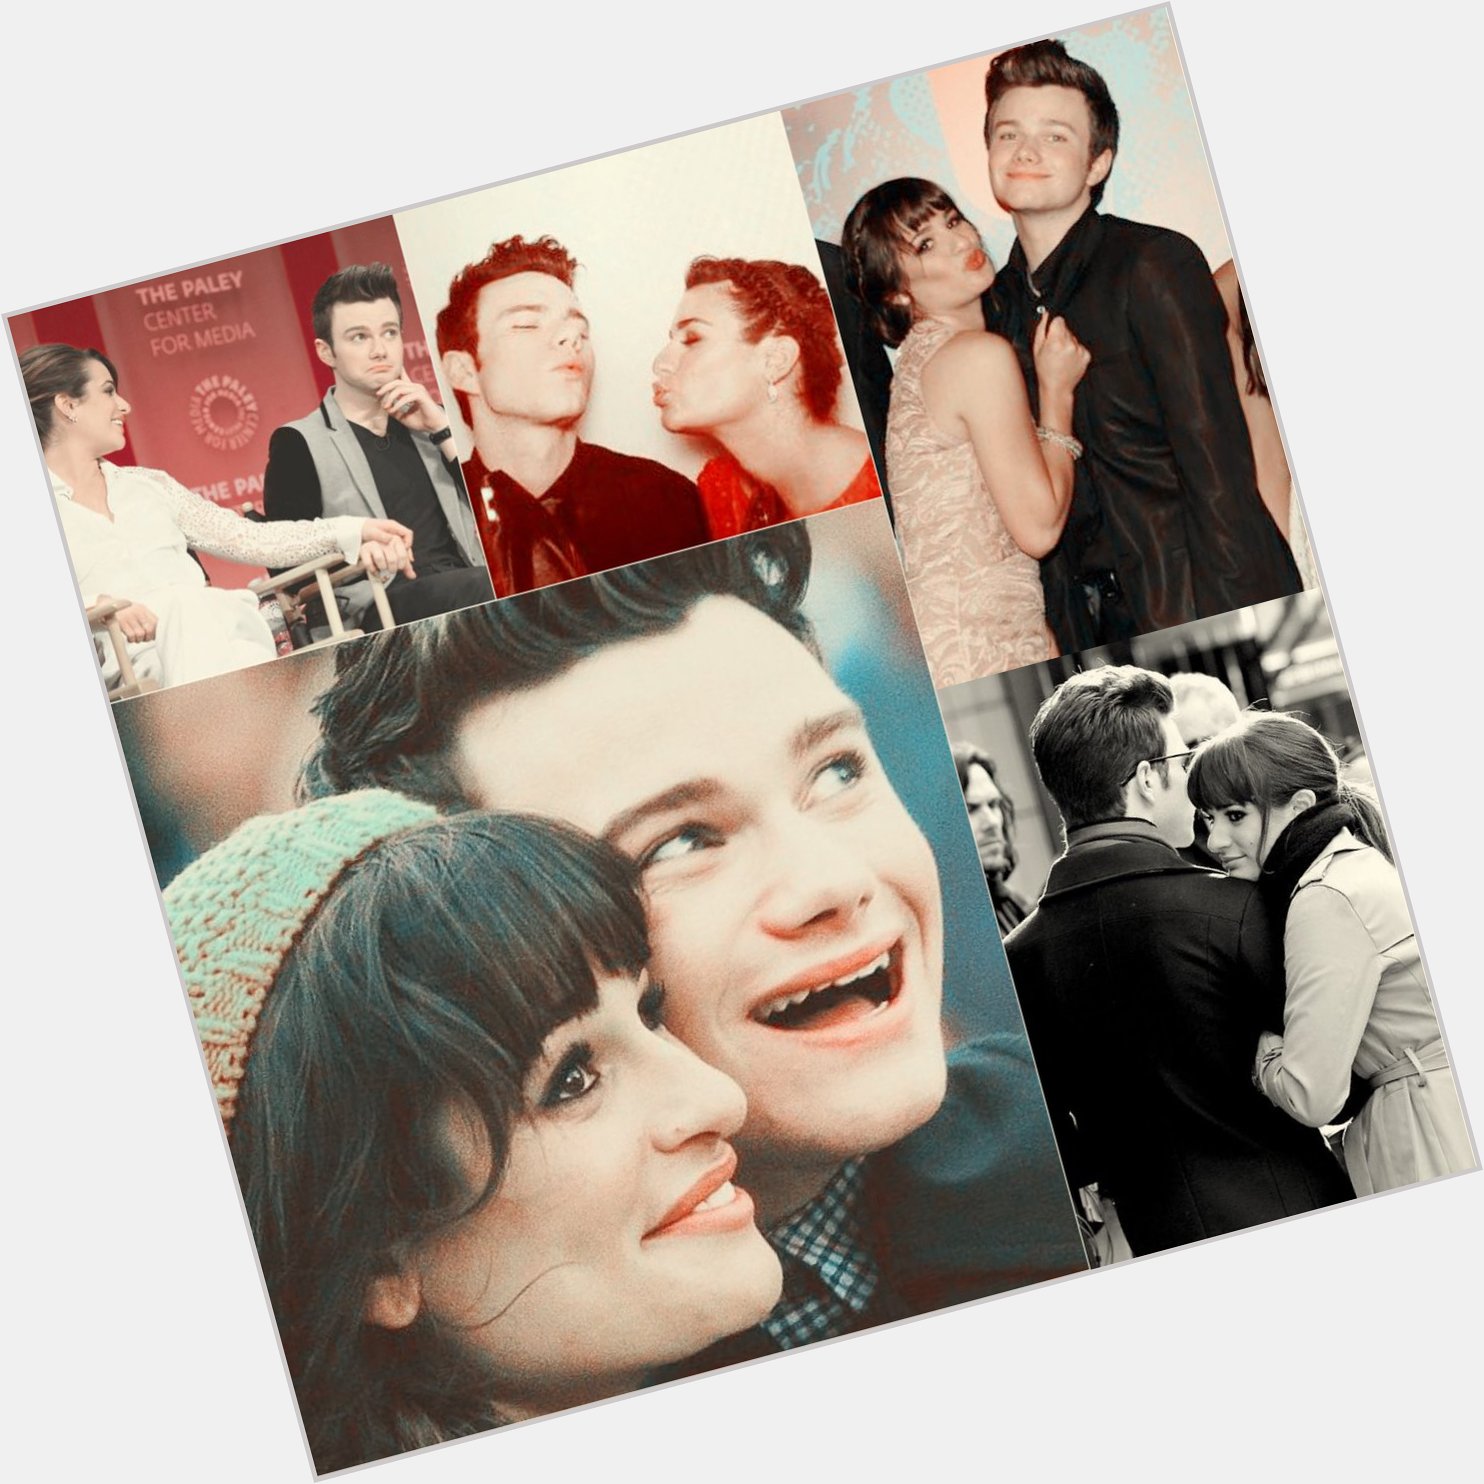 A Very Happy Birthday to the talented Chris Colfer   